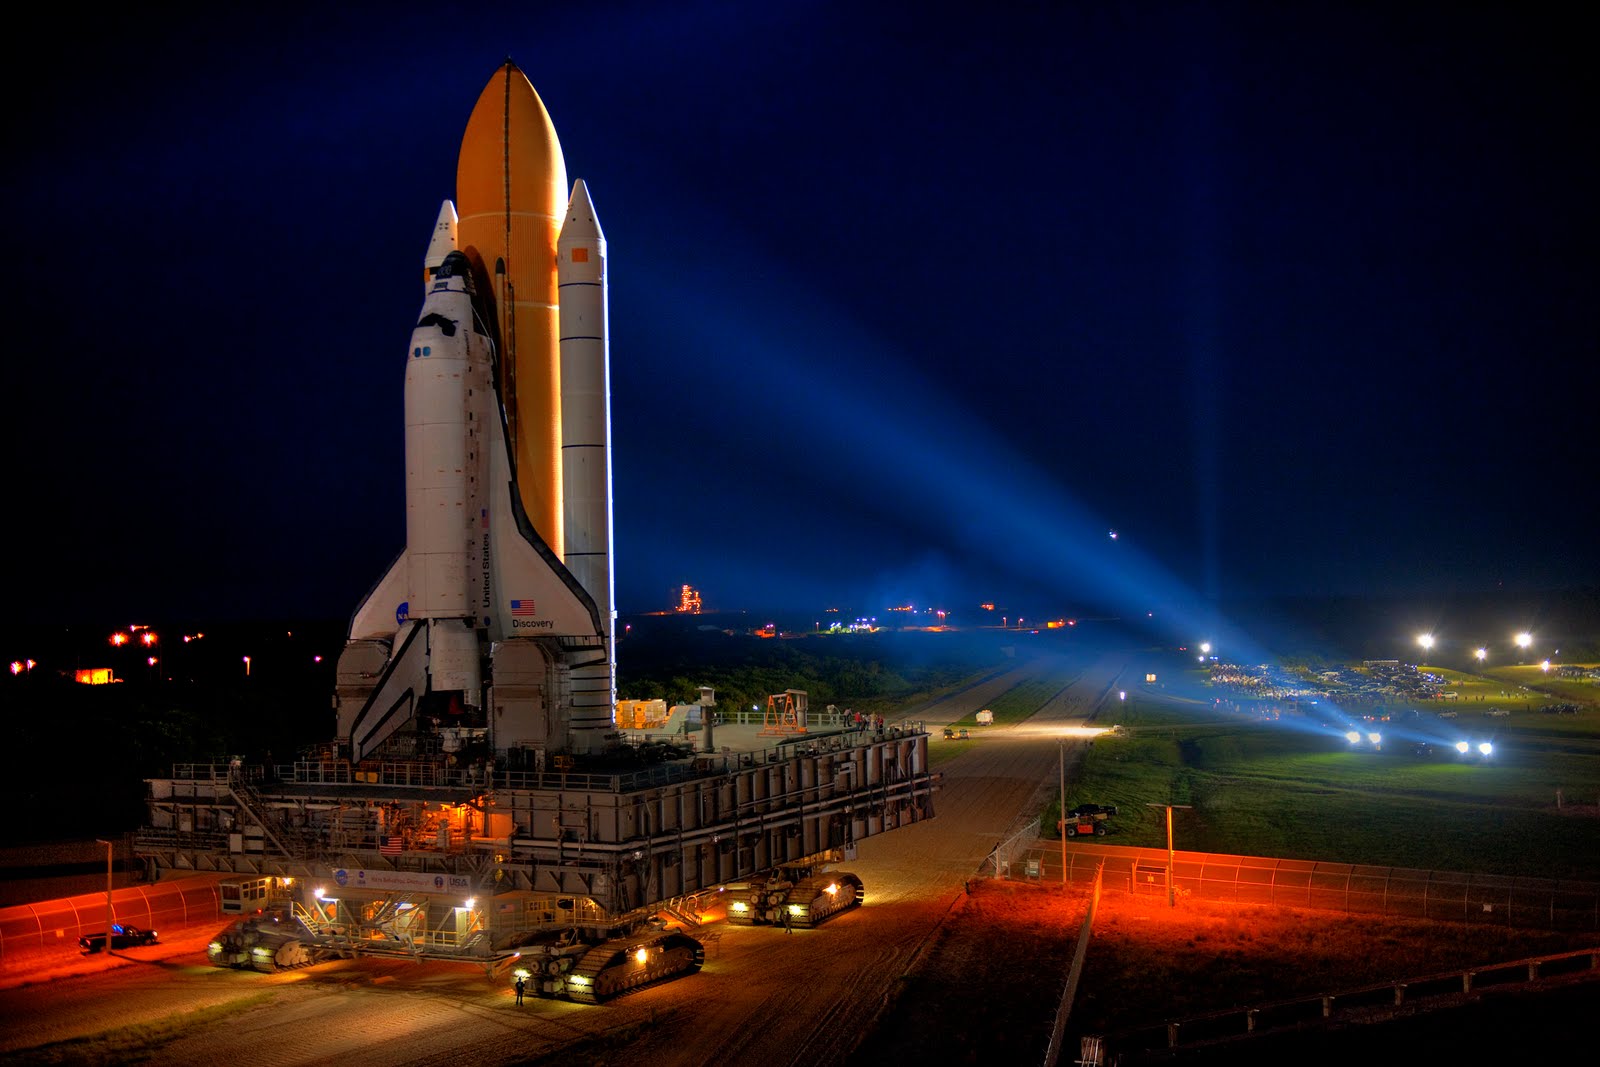 Space Shuttle Discovery Launch 2011